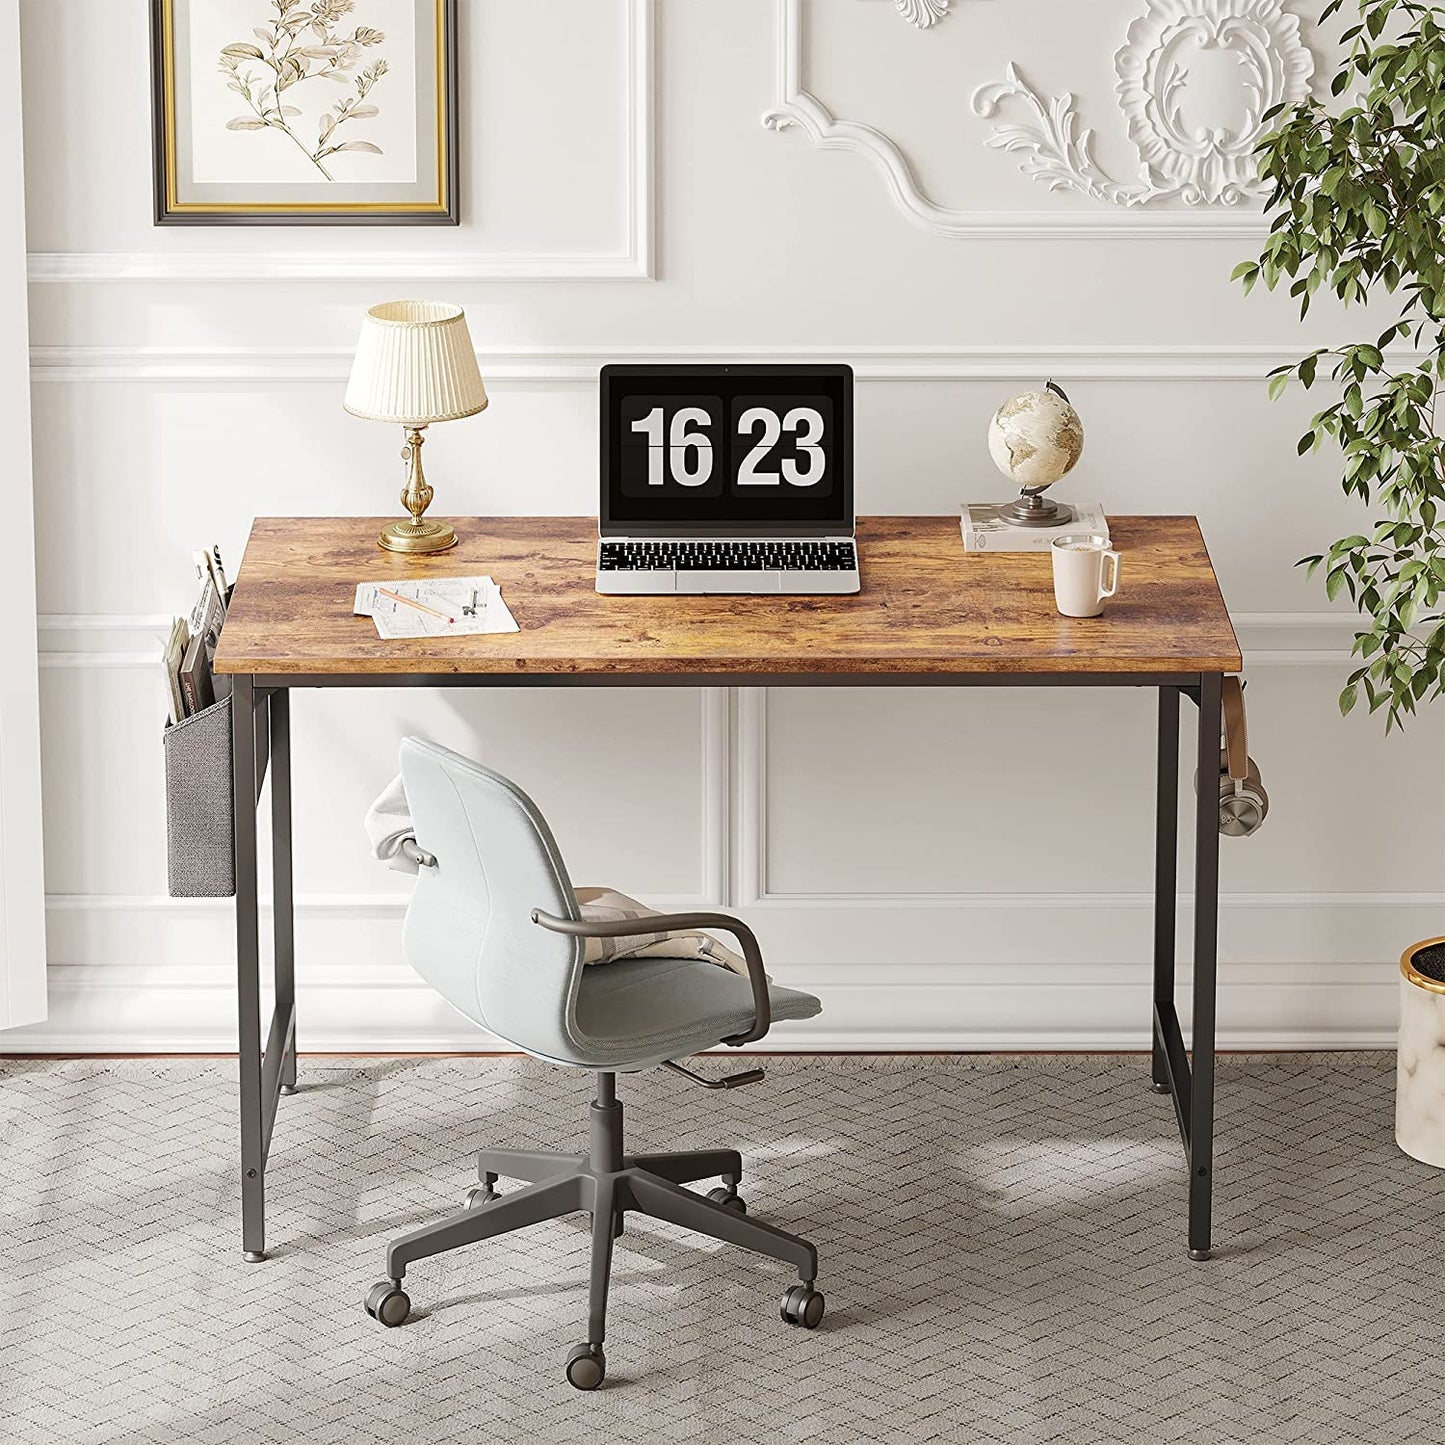 40" Study Computer Desk for Home Office, Modern Style PC Table with Black Metal Frame and Rustic Brown Finish